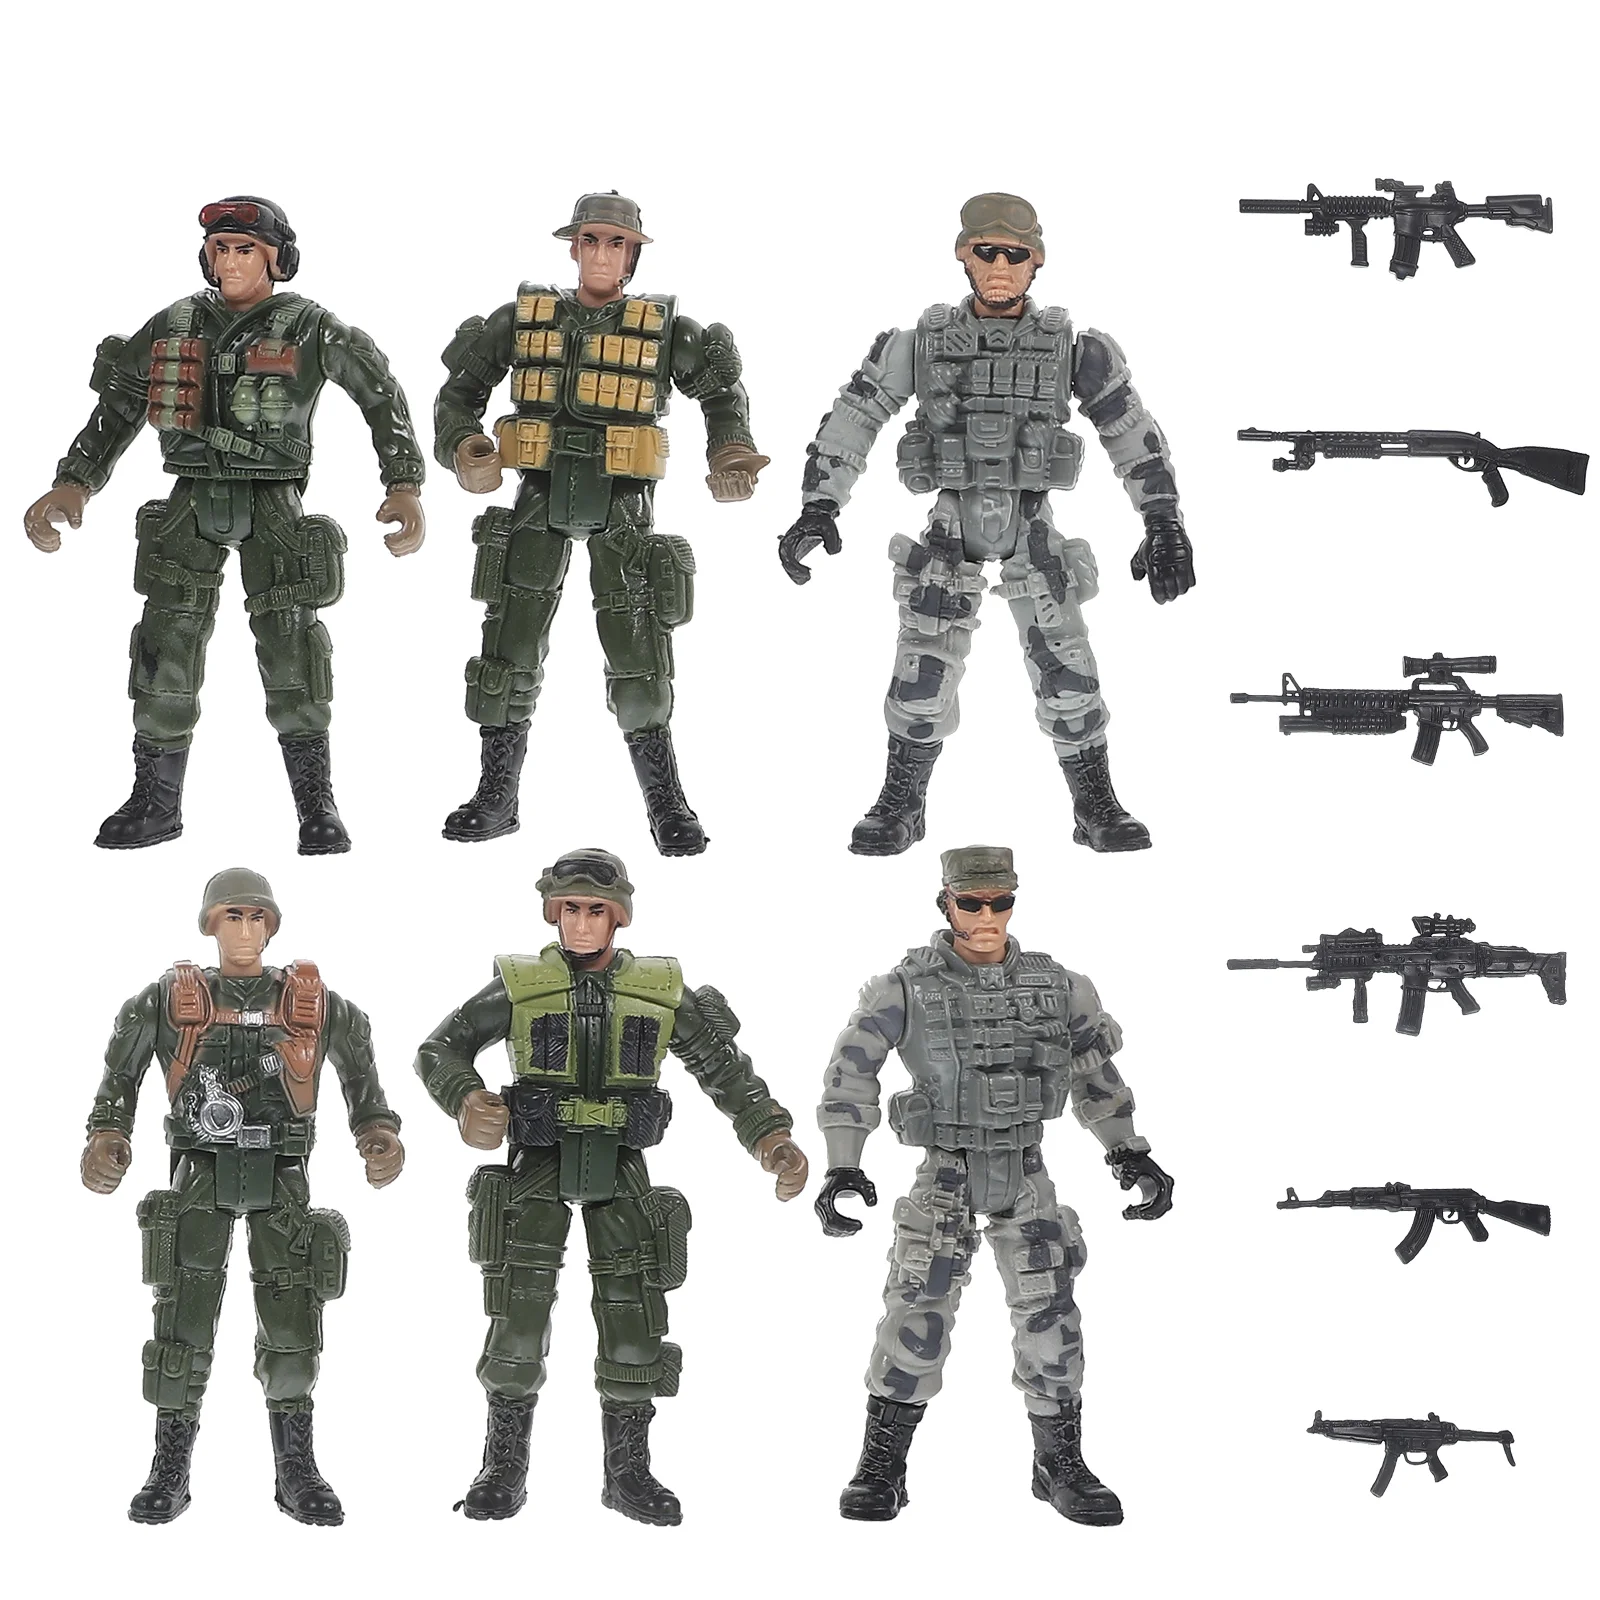 

Soldier Model Child Playsets Mini People Models Small Kids+toys Miniature Figures for Decor Plastic Figurines Decors